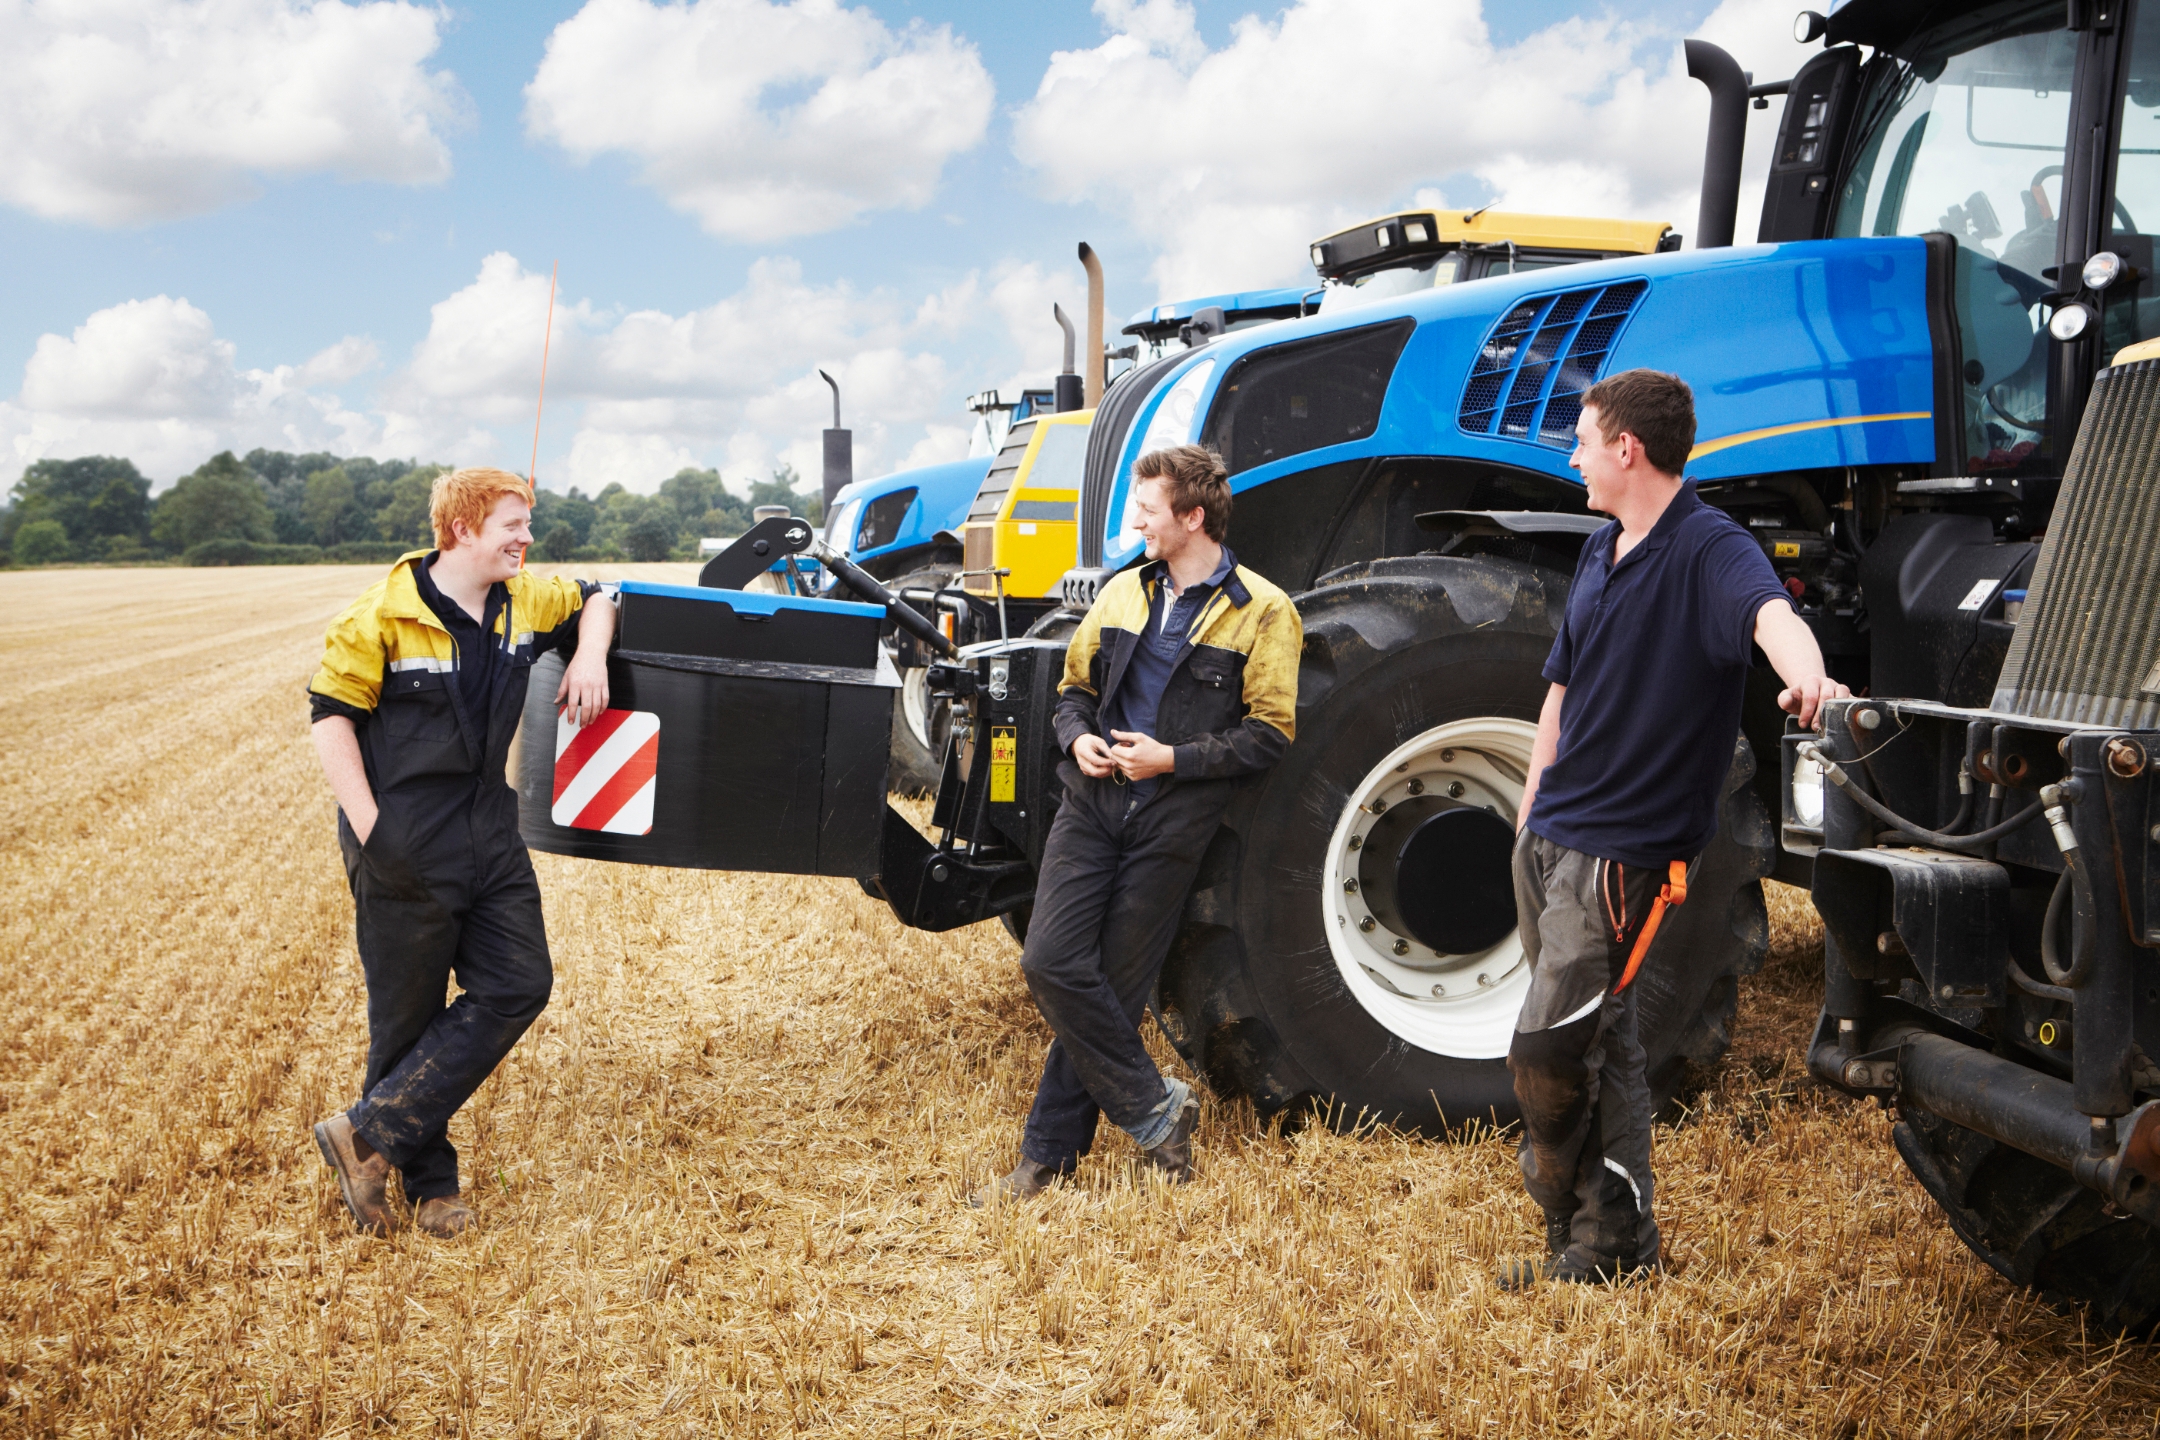 Tractors and other heavy equipment contain greater amounts of electronics and software as the industry digitalizes